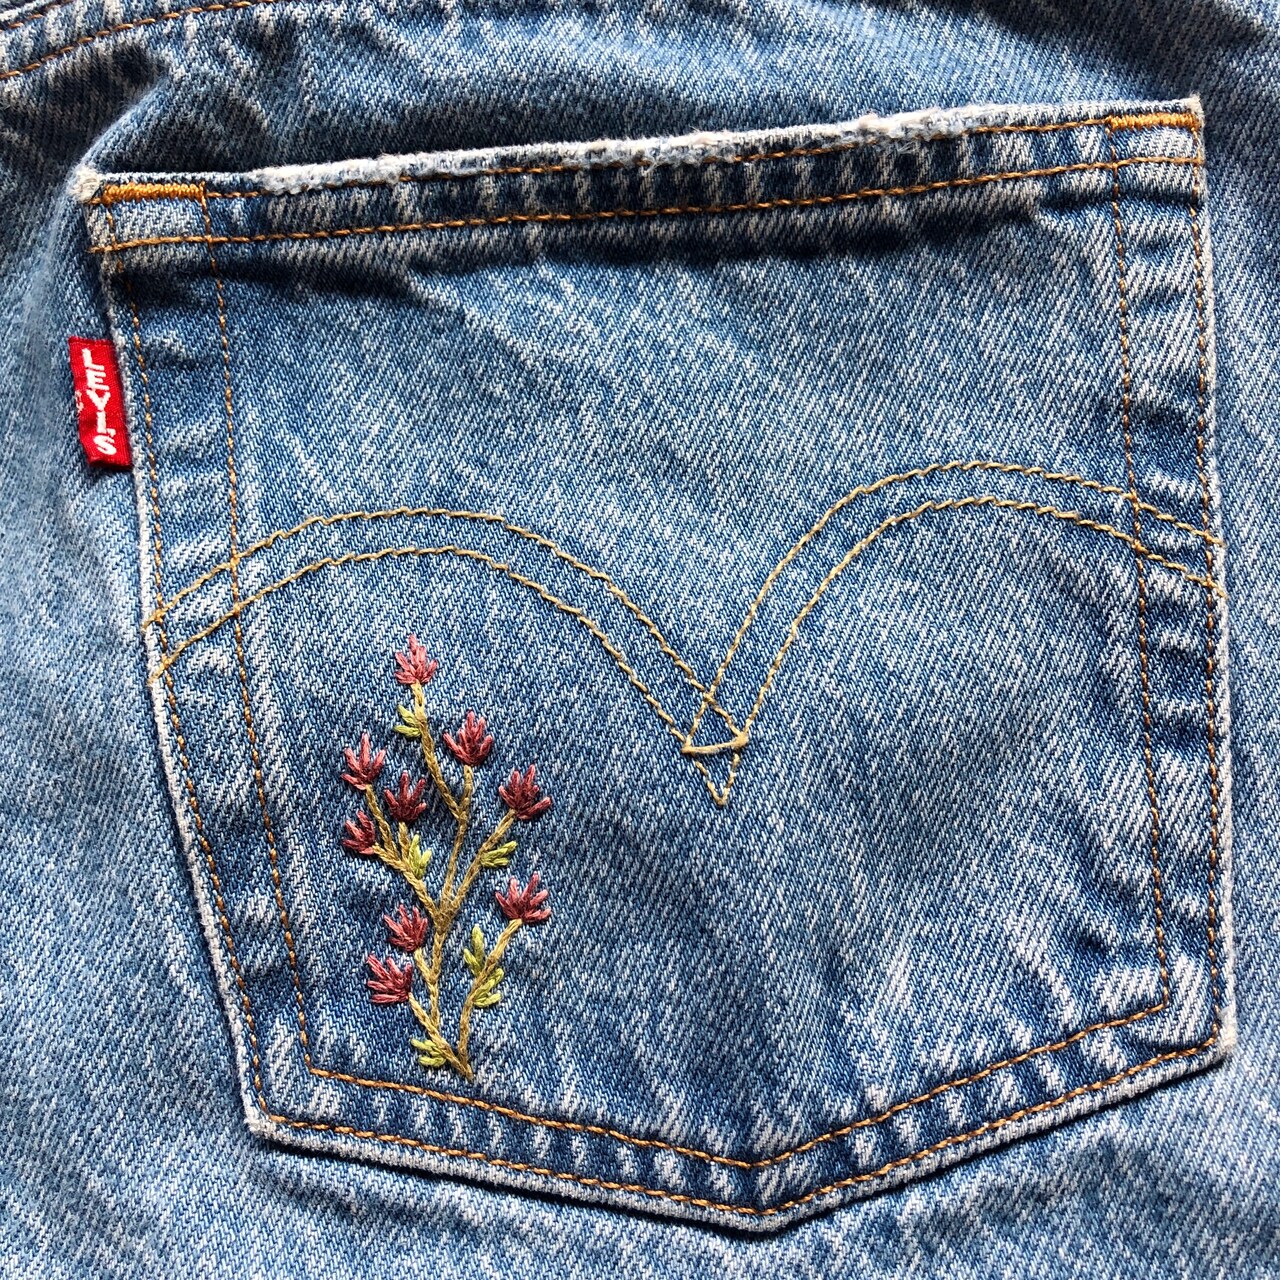 Floral Denim Pocket Embroidery with DMC